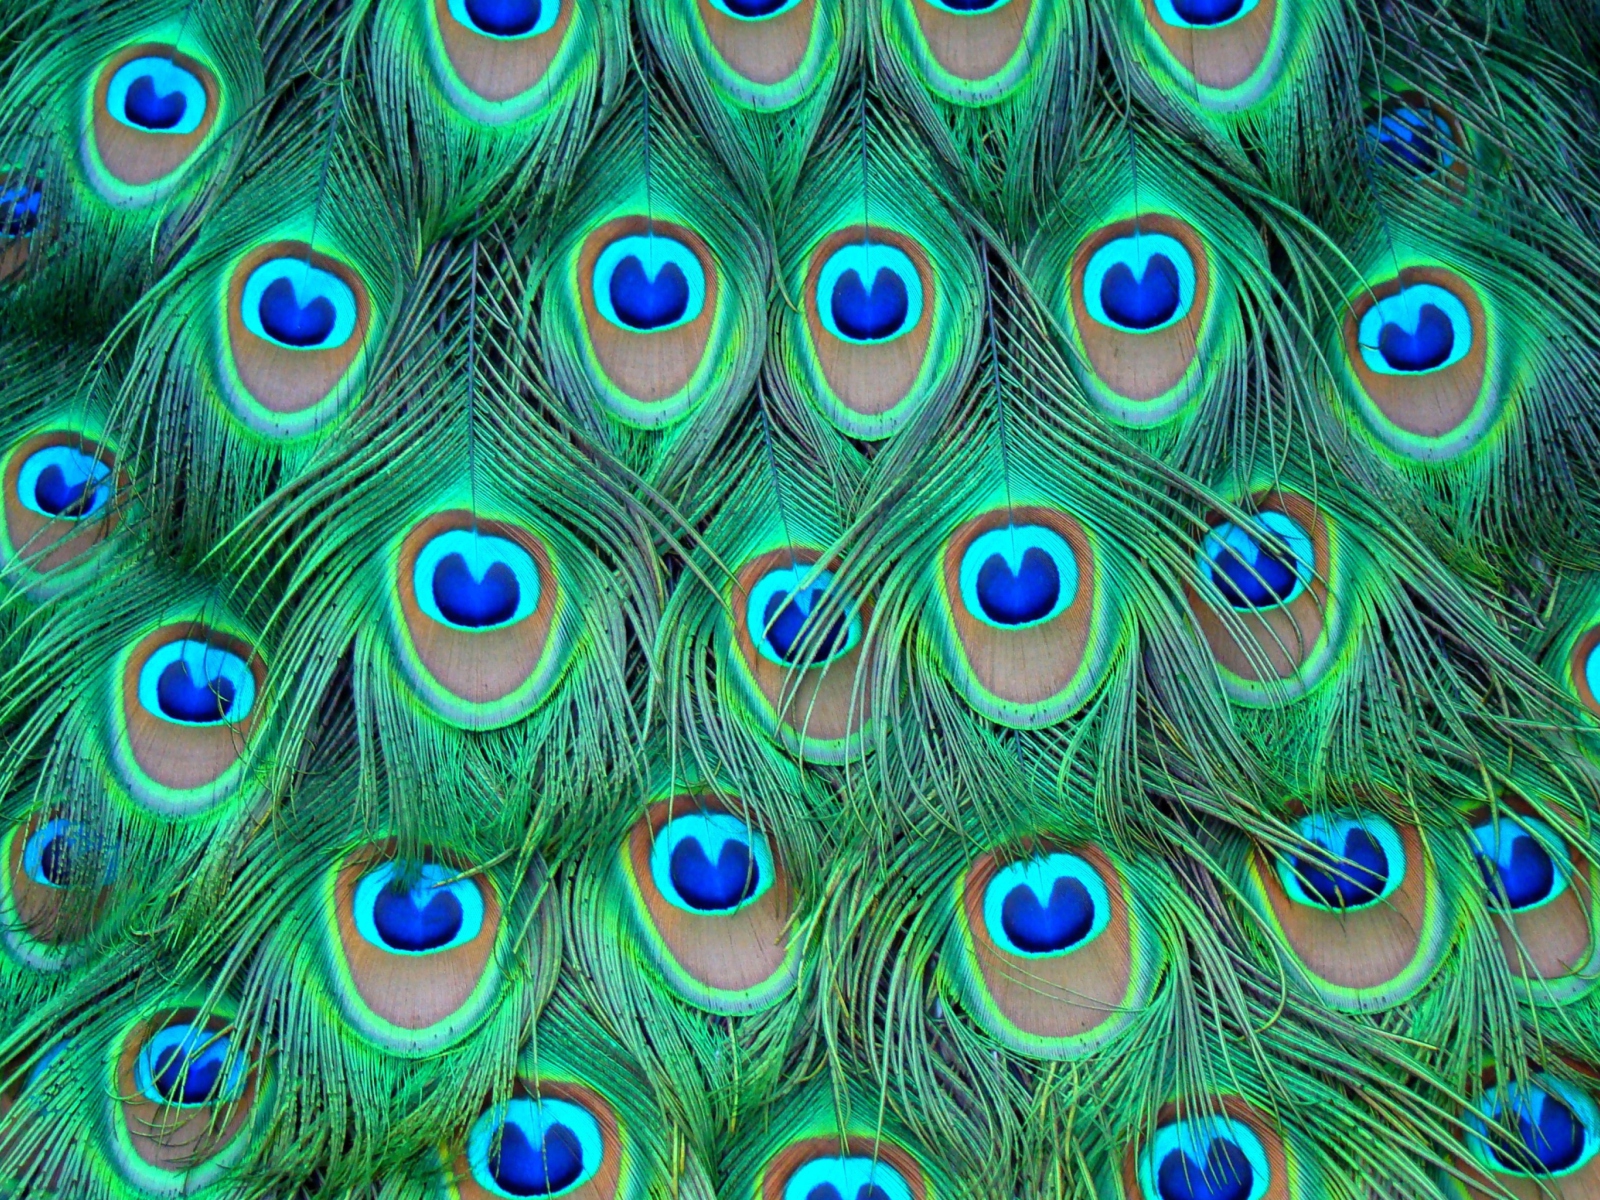 Peacock Feathers wallpaper 1600x1200